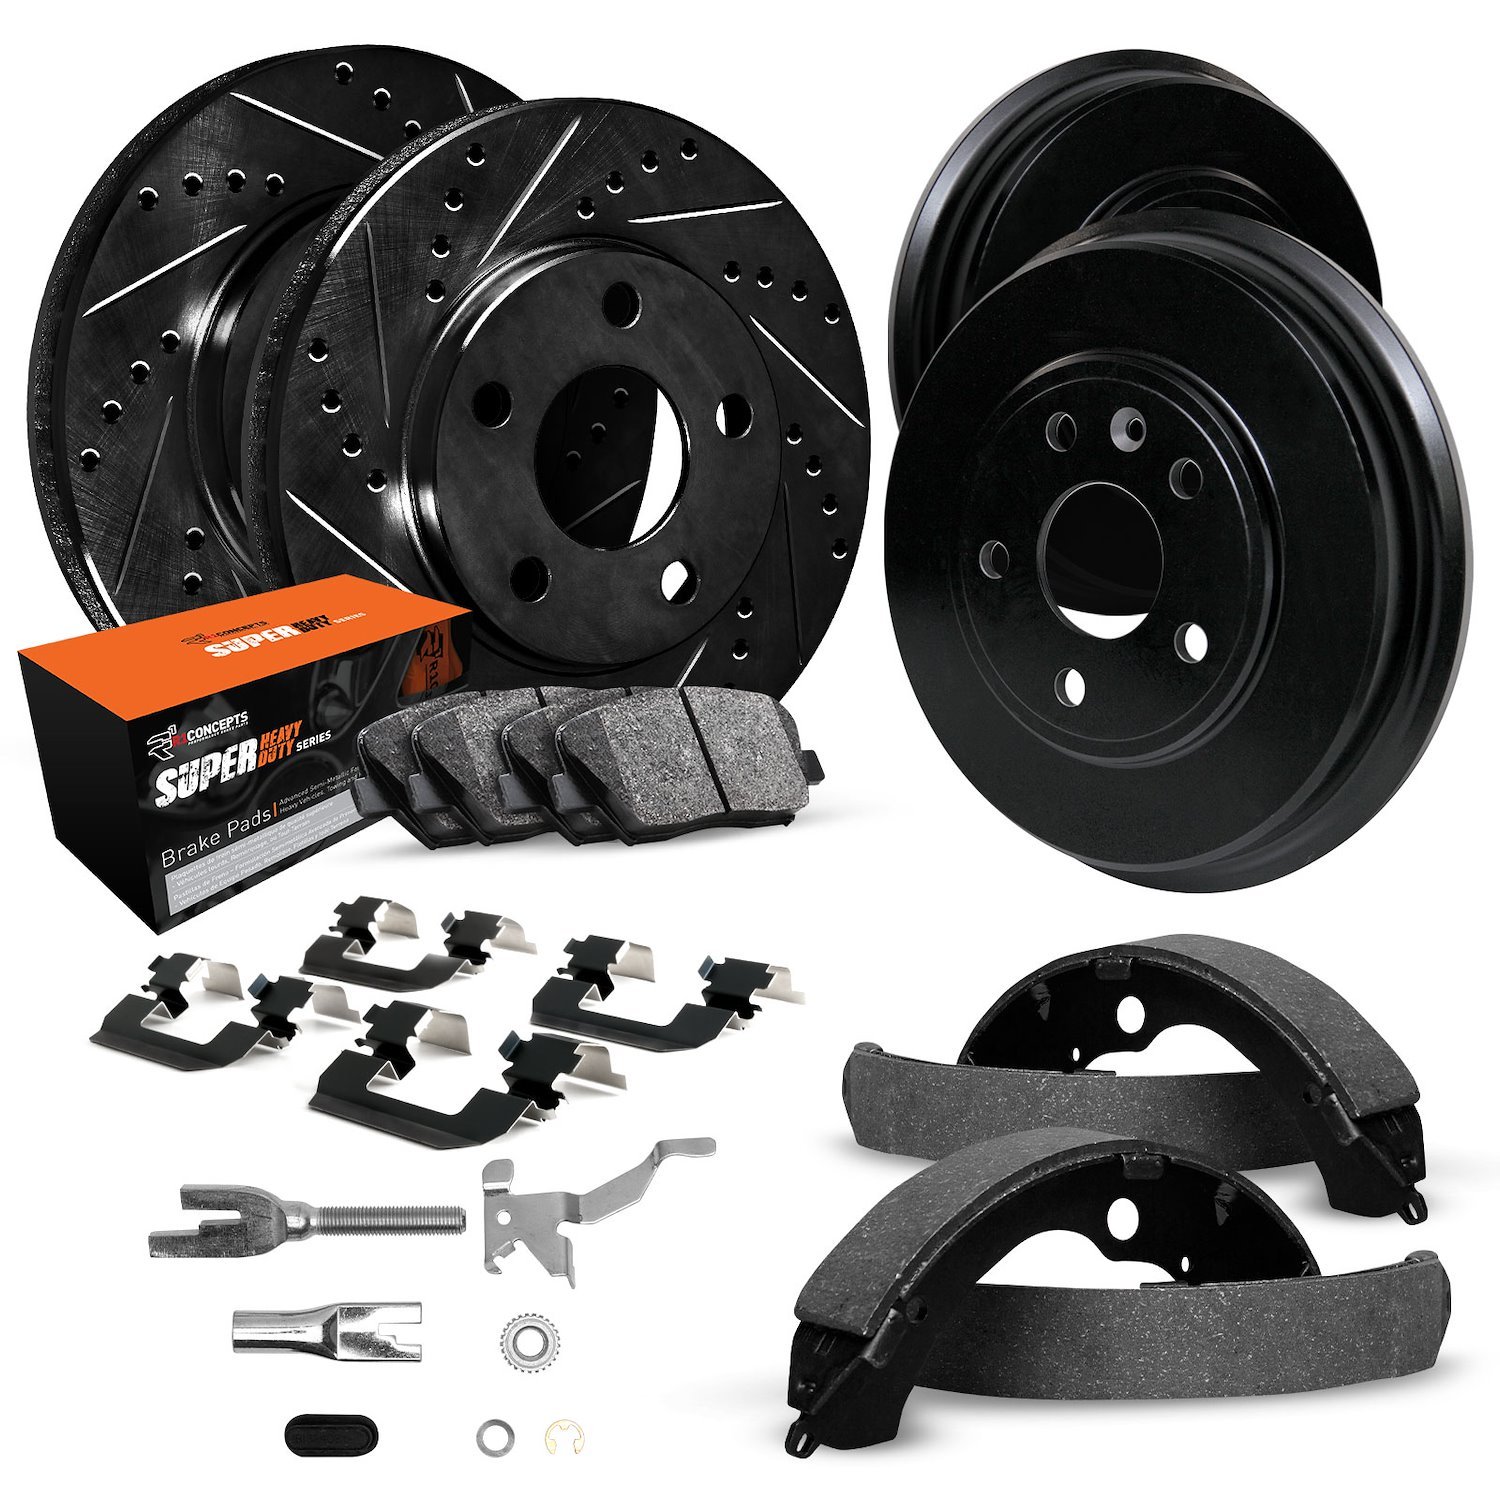 E-Line Drilled/Slotted Black Rotor & Drum Set w/Super-Duty Pads, Shoes, Hardware/Adjusters, 2005-2005 GM